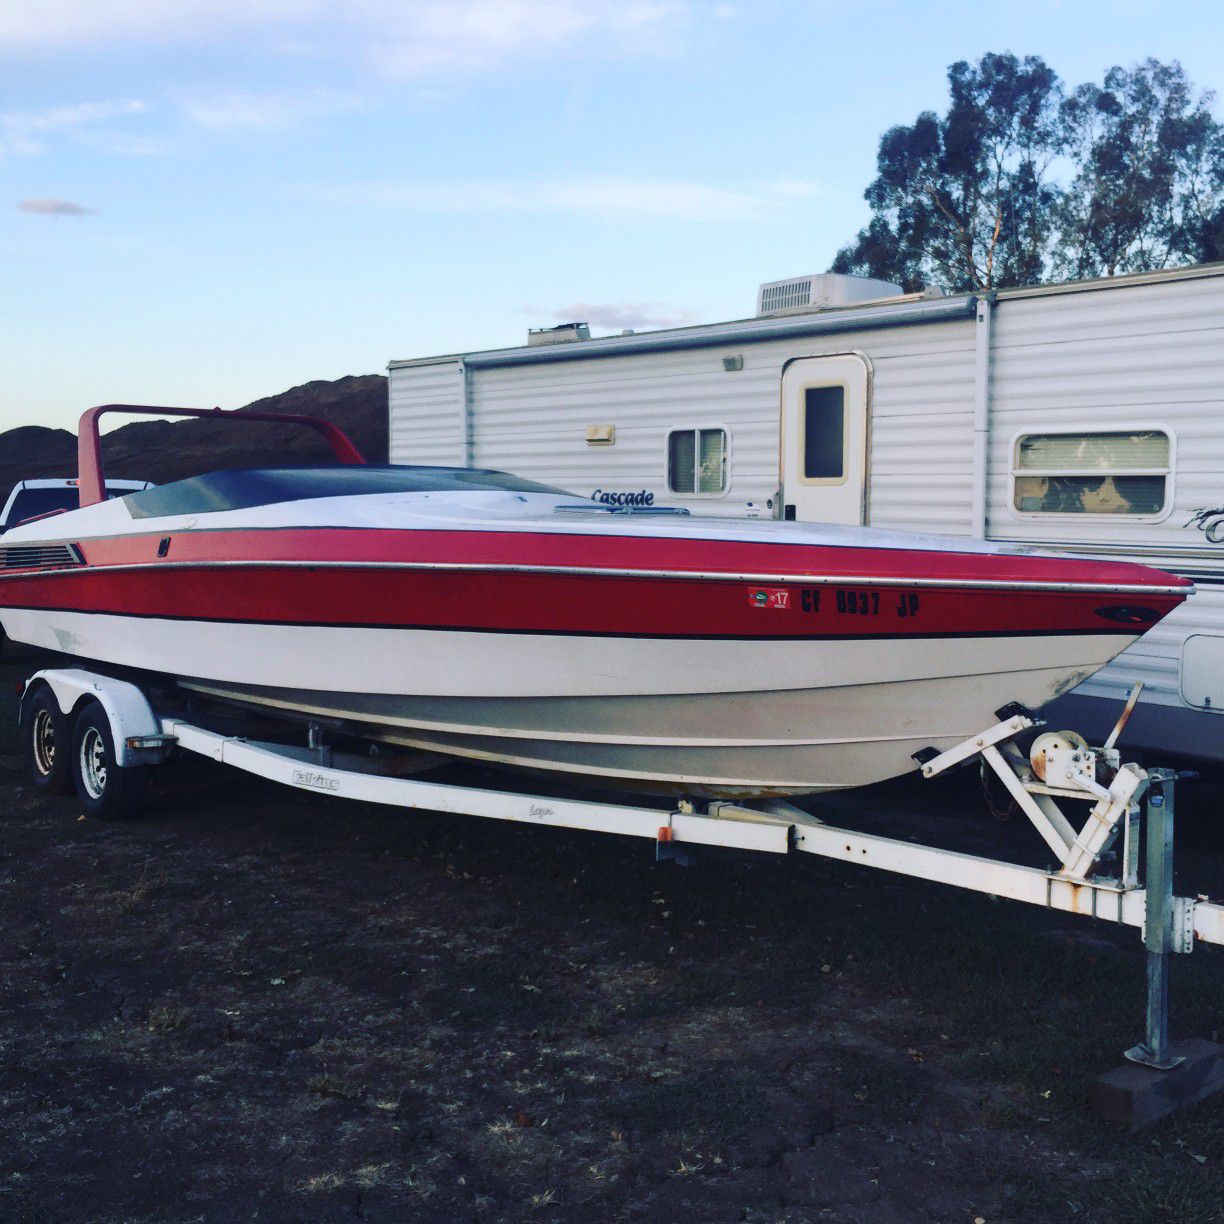 28 foot scarab 502 with blower